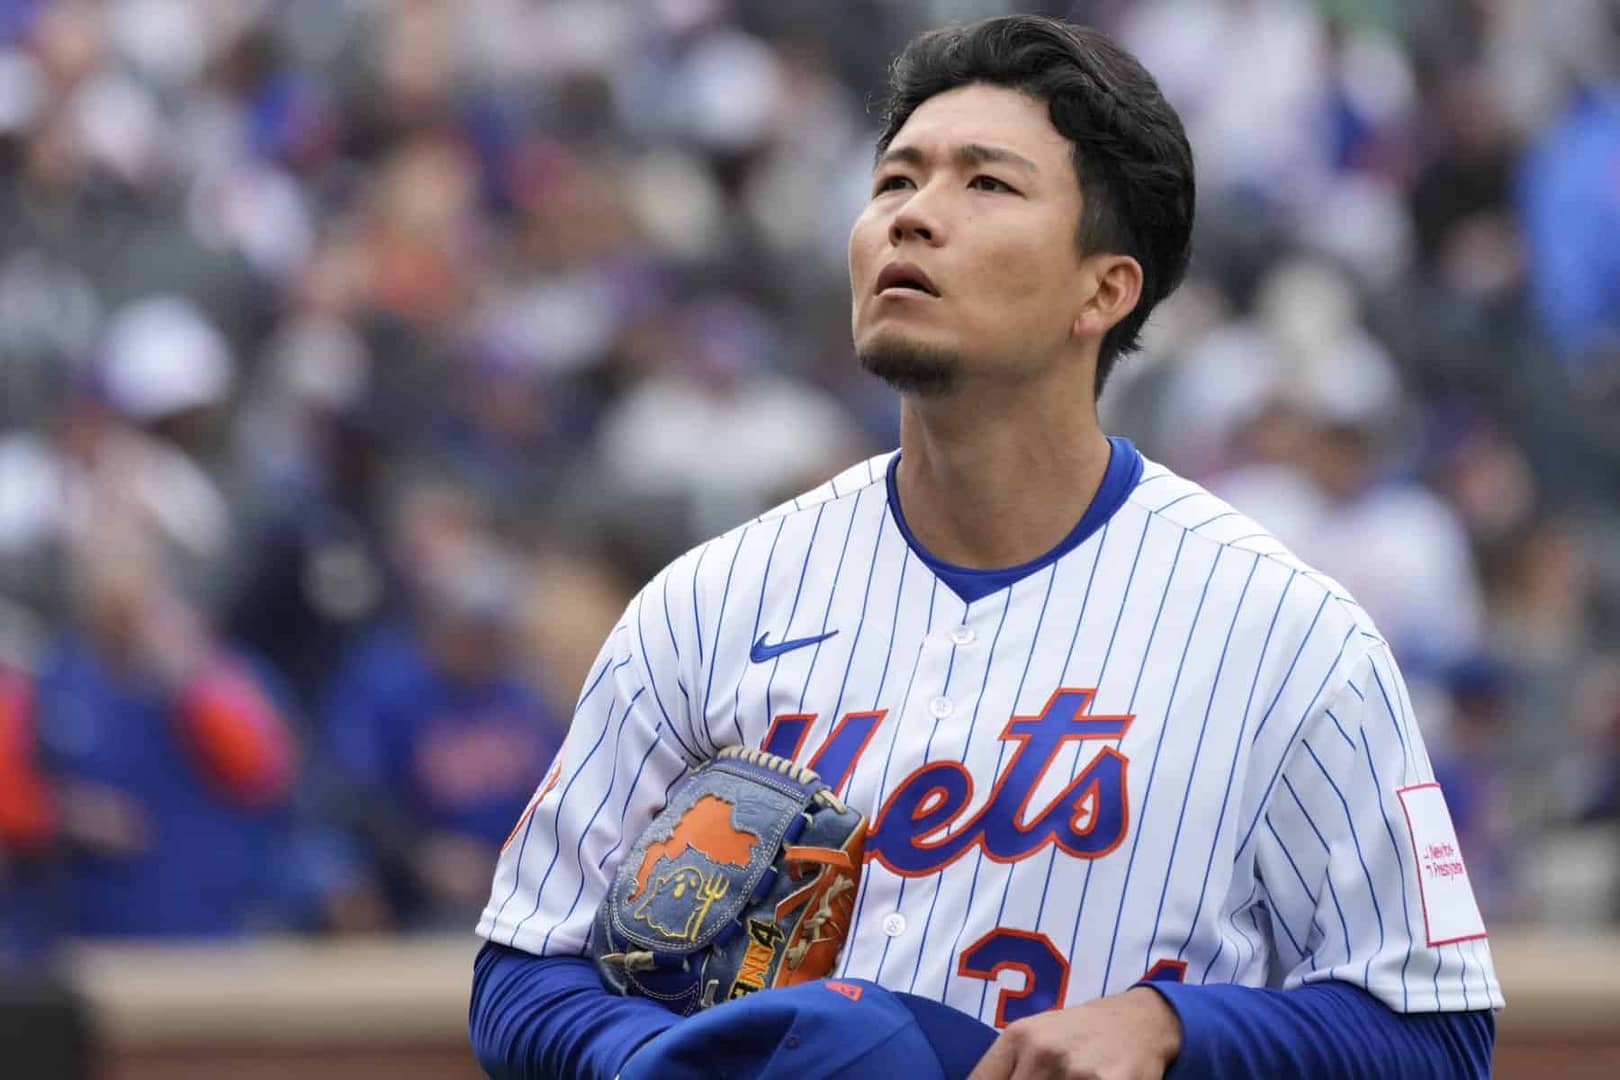 The best Nationals-Mets MLB prediction and picks to know for Thursday's game is a MLB bet at BetRivers with odds of +155 for CJ Abrams to...